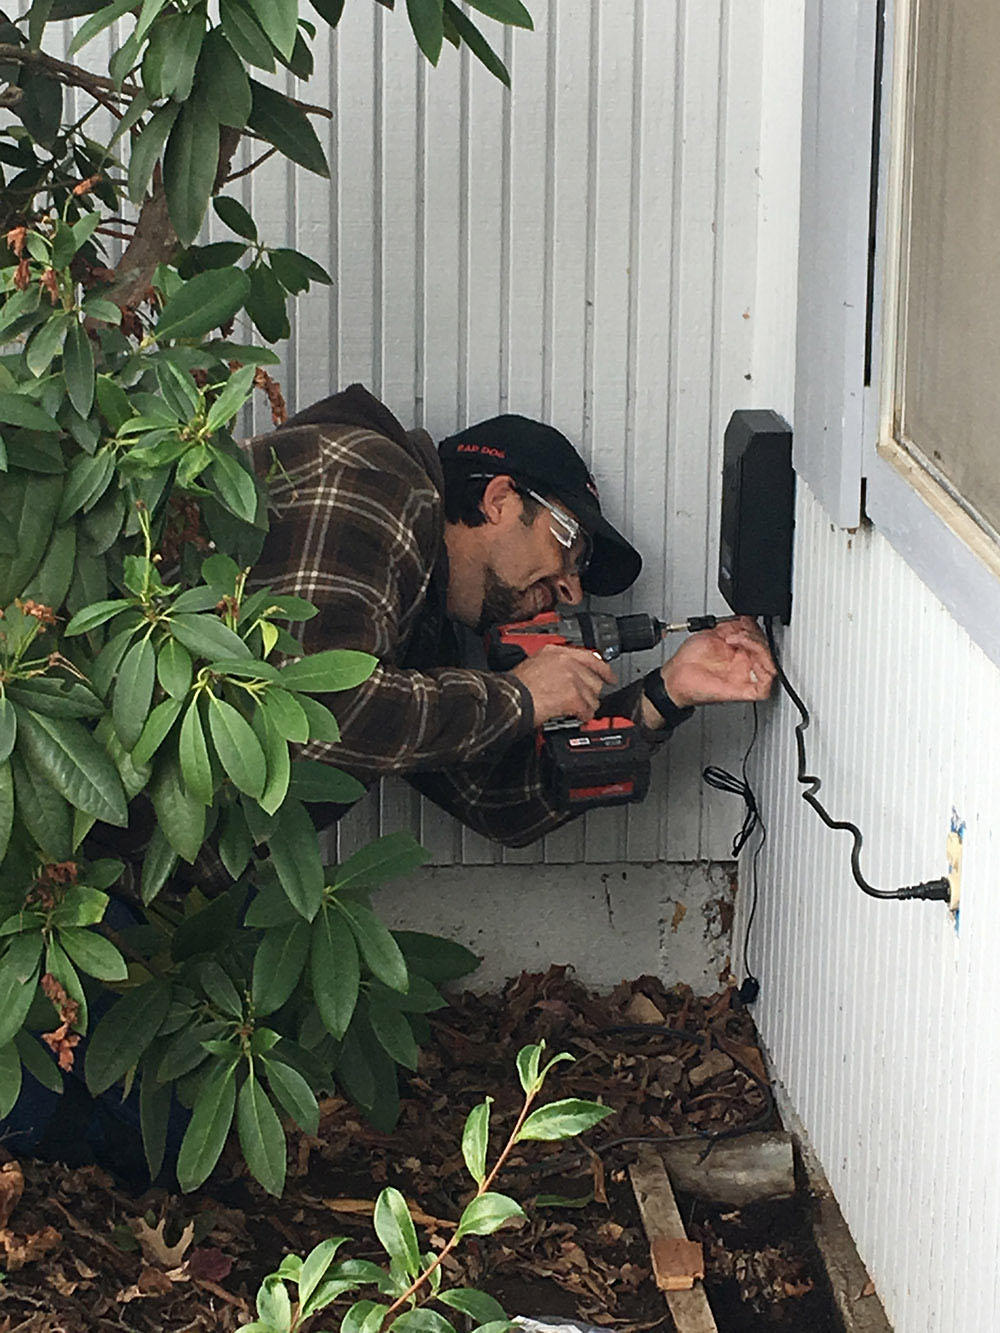 A man installing a digital transformer on the side of a house.